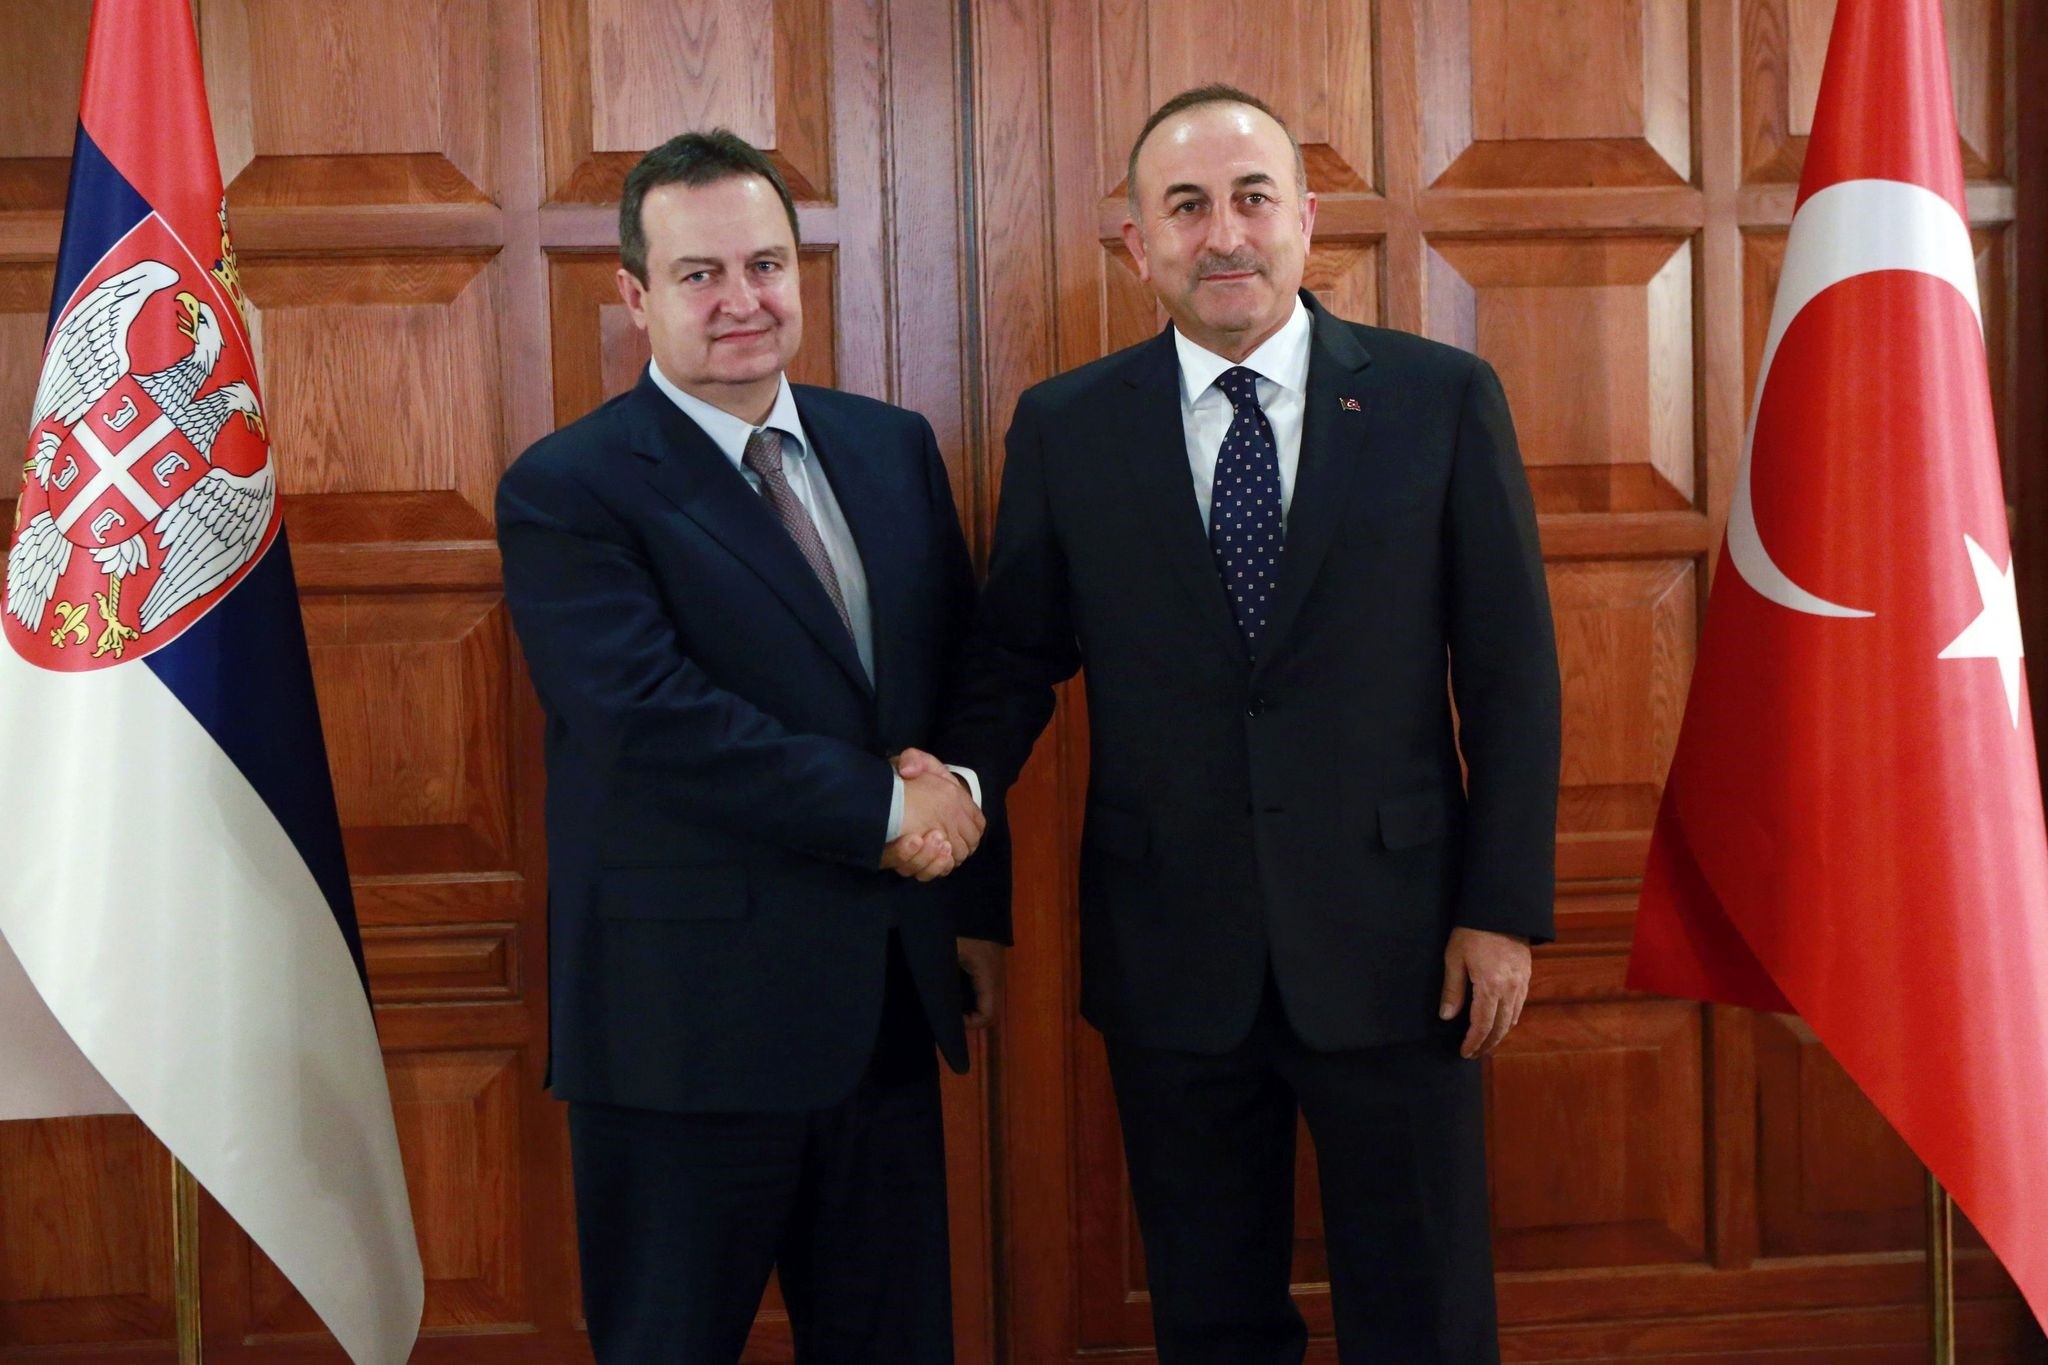 Foreign Minister u00c7avuu015fou011flu (R) shakes hands with Serbian counterpart Dacic in Ankara, October 5, 2016. (AFP Photo)